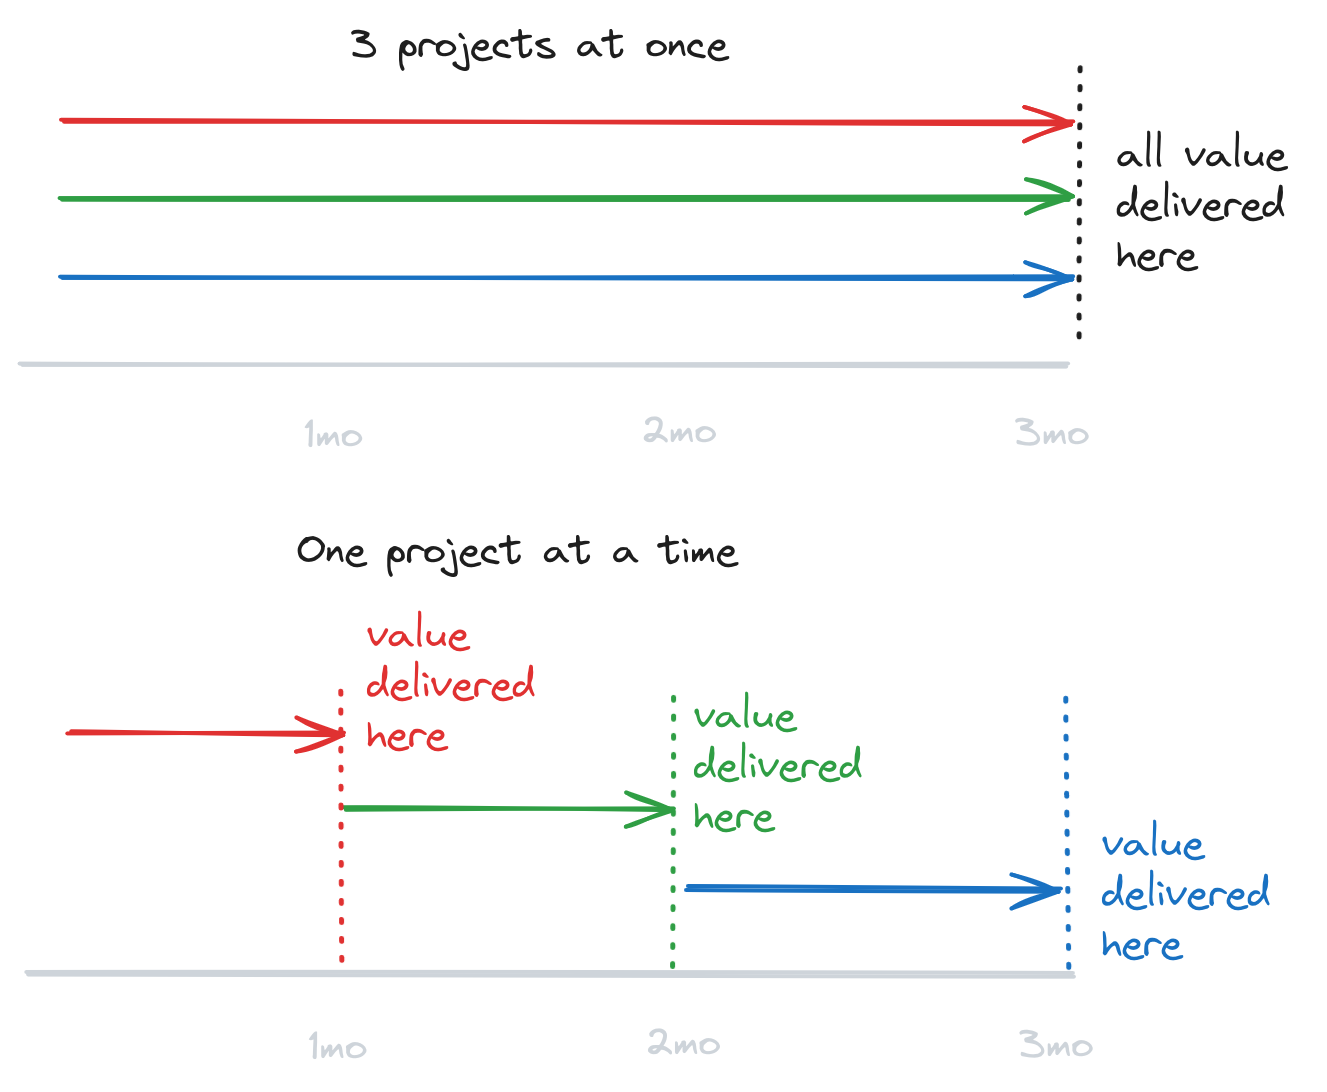 Two diagrams. In the first, three projects run concurrently all deliver their value after three months. In the second, each project is run consecutively, and so the first project&rsquo;s value is delivered after the first month, the second after the second month, and the third after the third month.